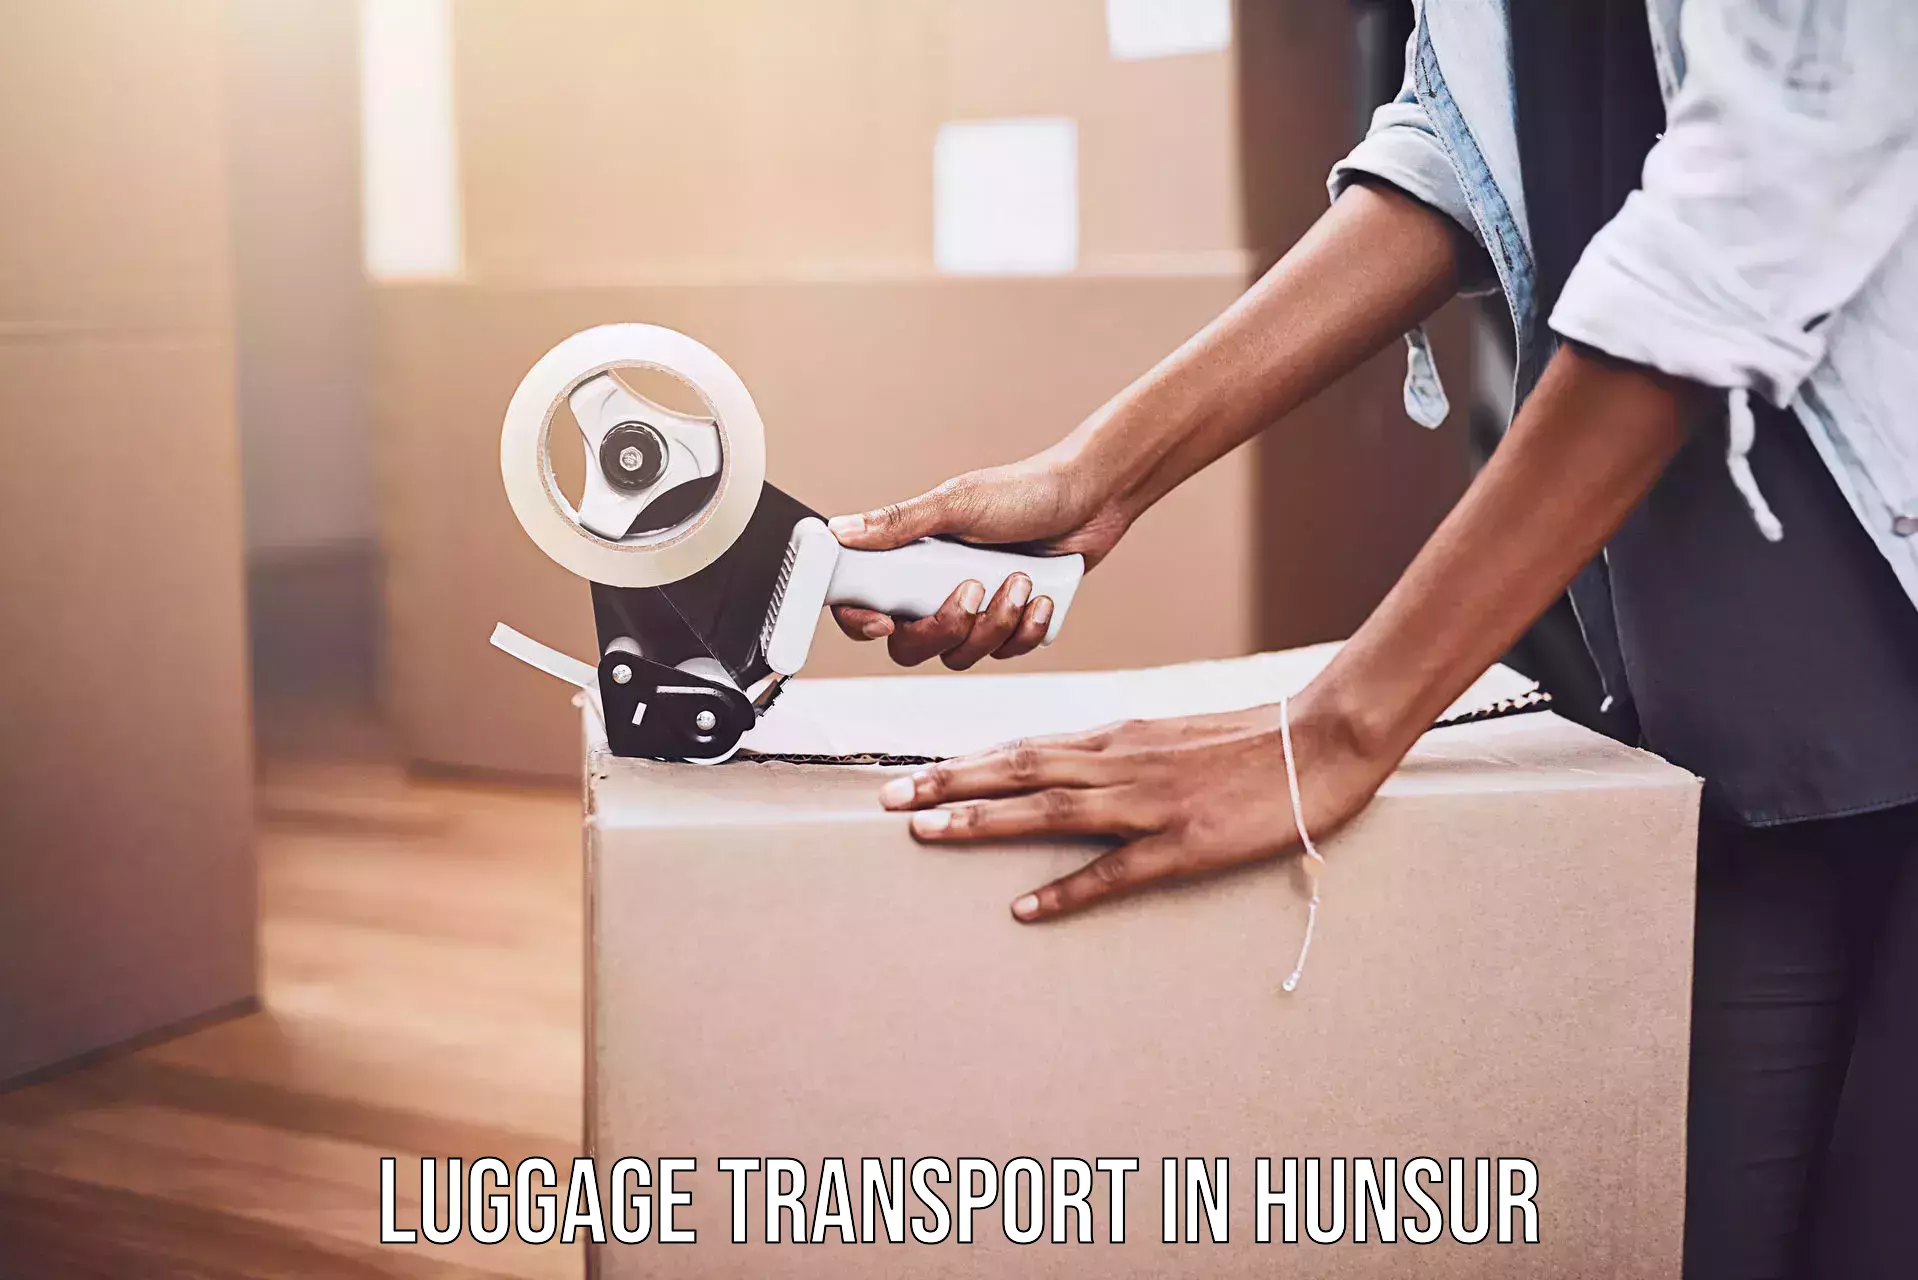 Luggage transport pricing in Hunsur